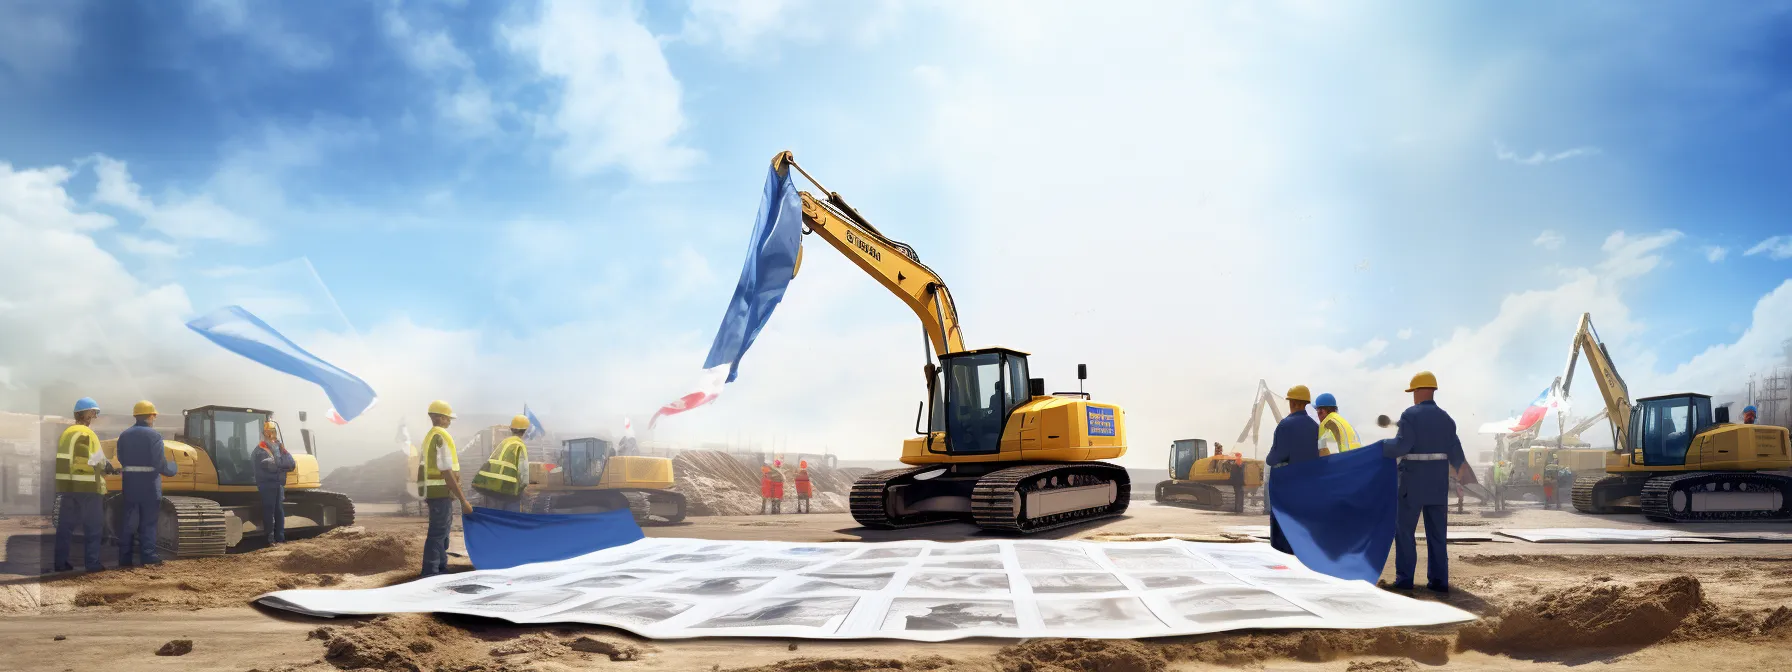 a construction site with workers and machinery surrounded by legal documents and international flags, symbolizing the interplay of construction investments and international investment law.